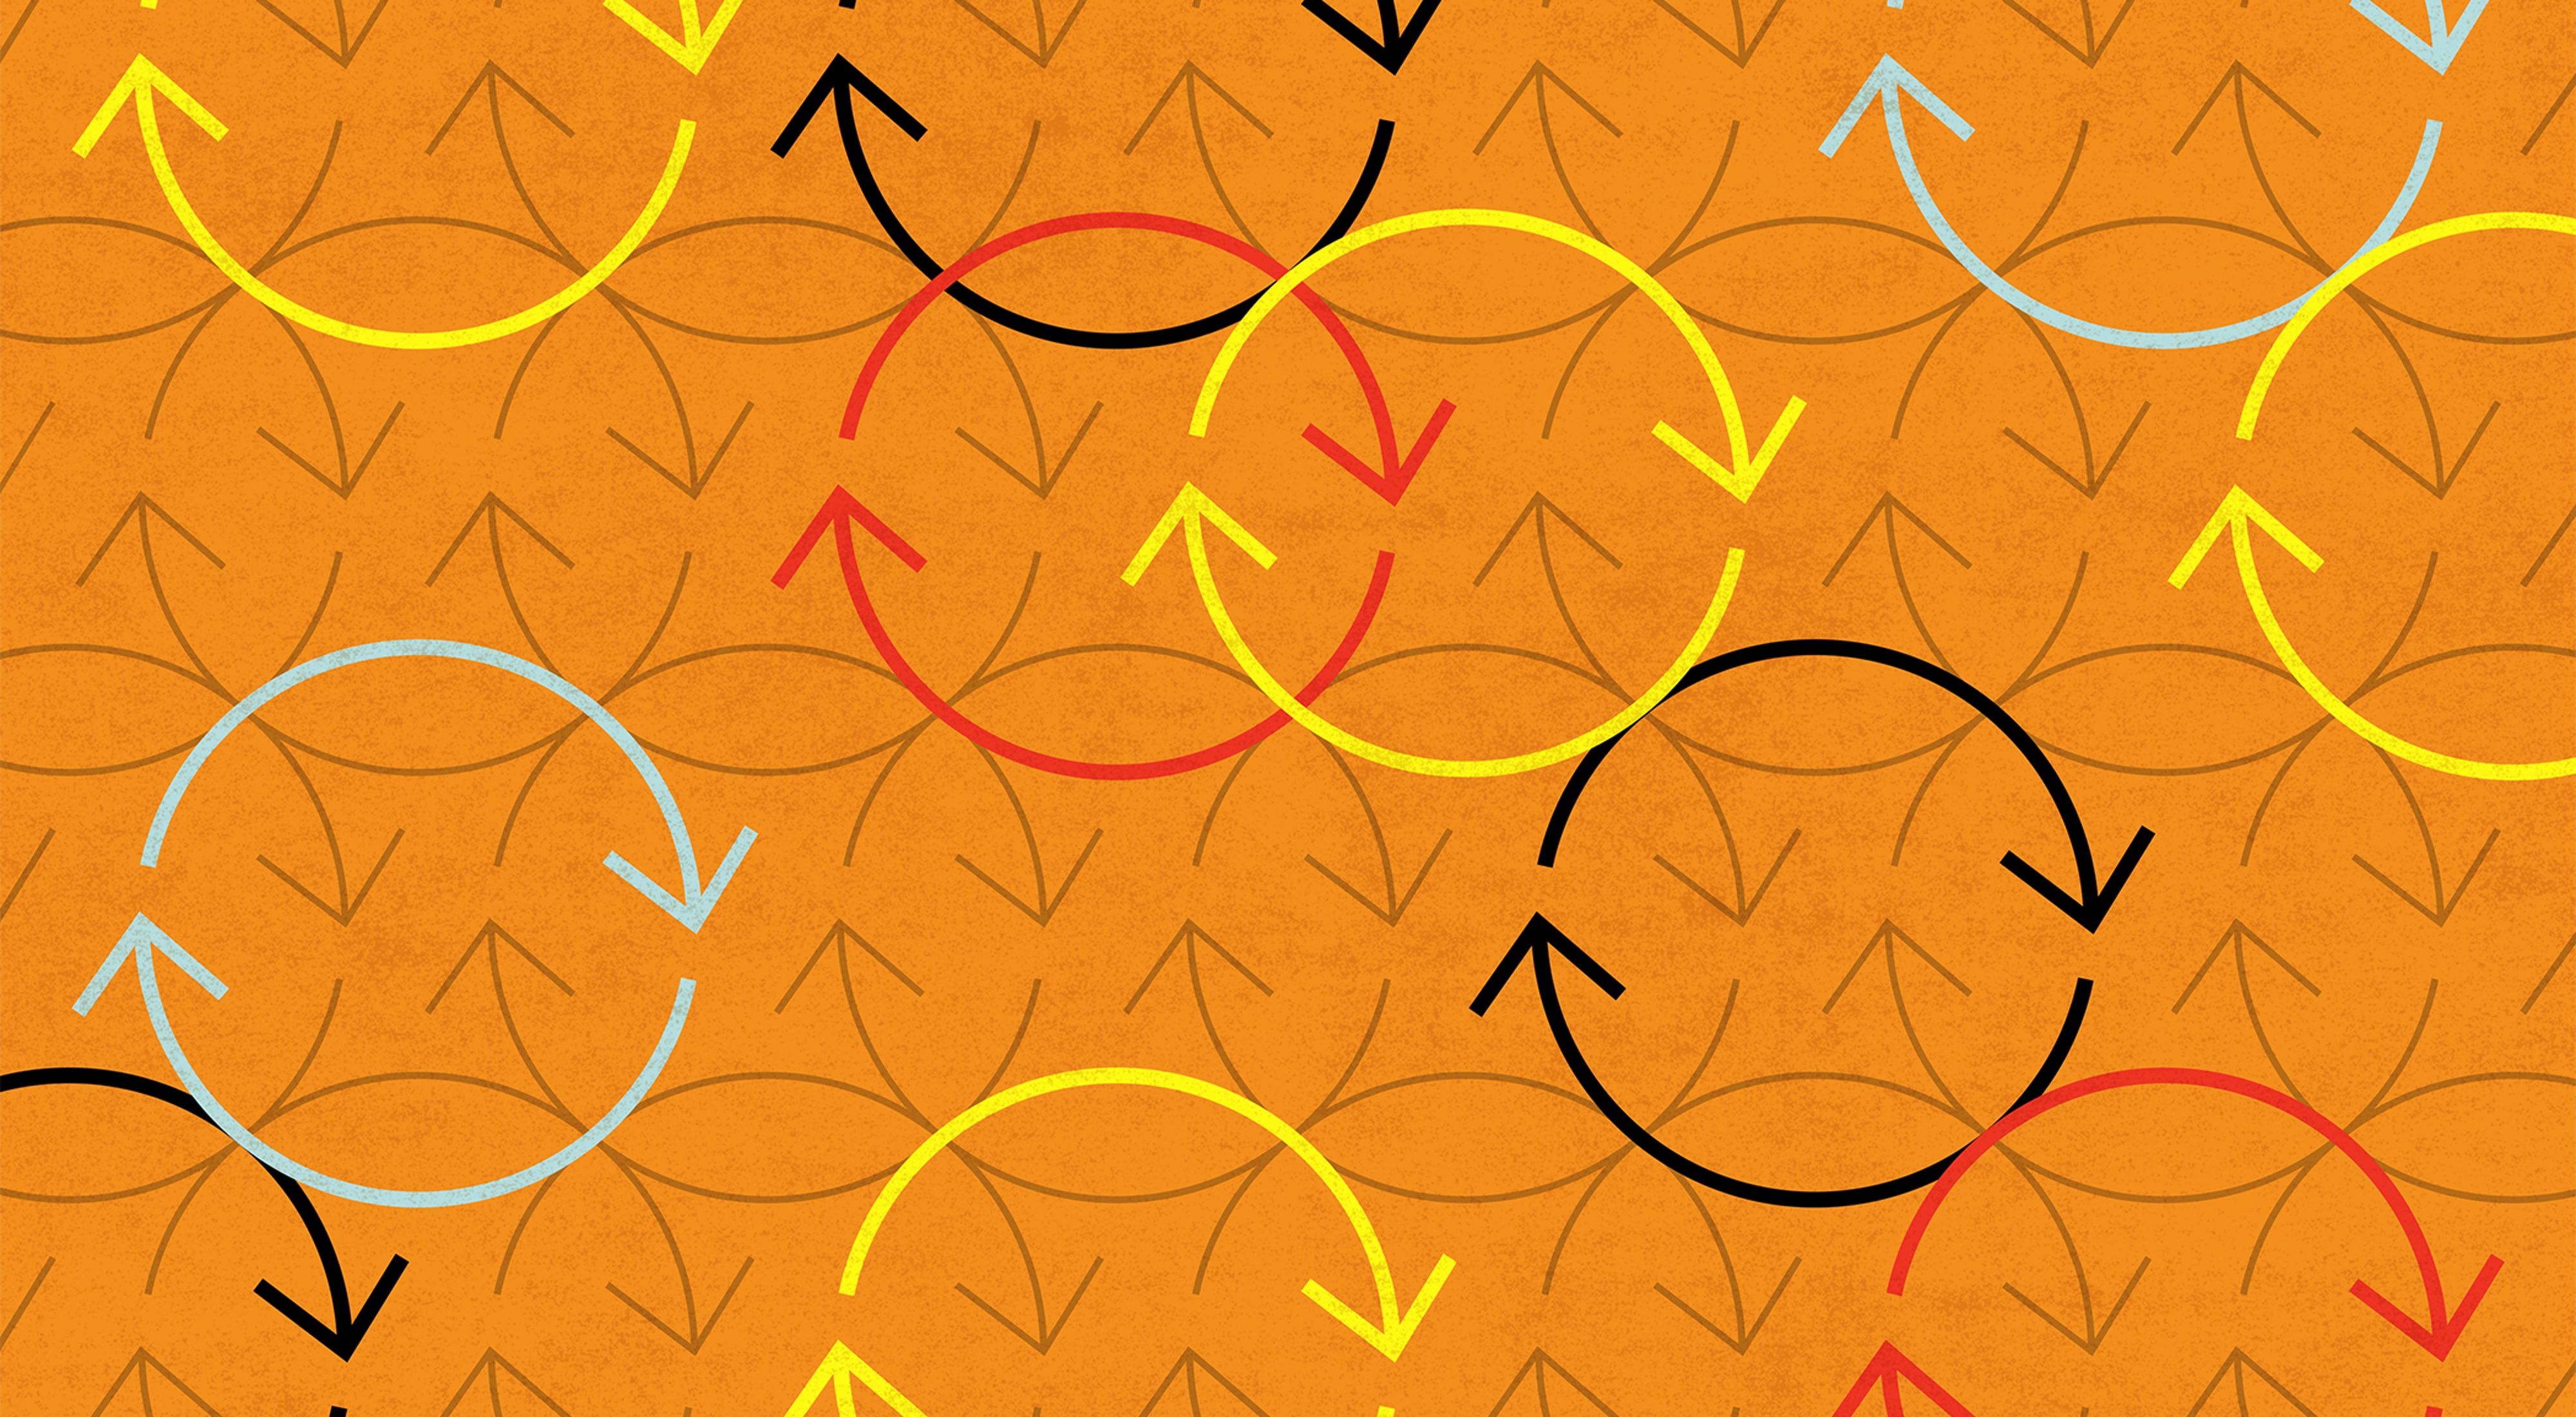 A pattern of circular arrows overlapping against an orange background